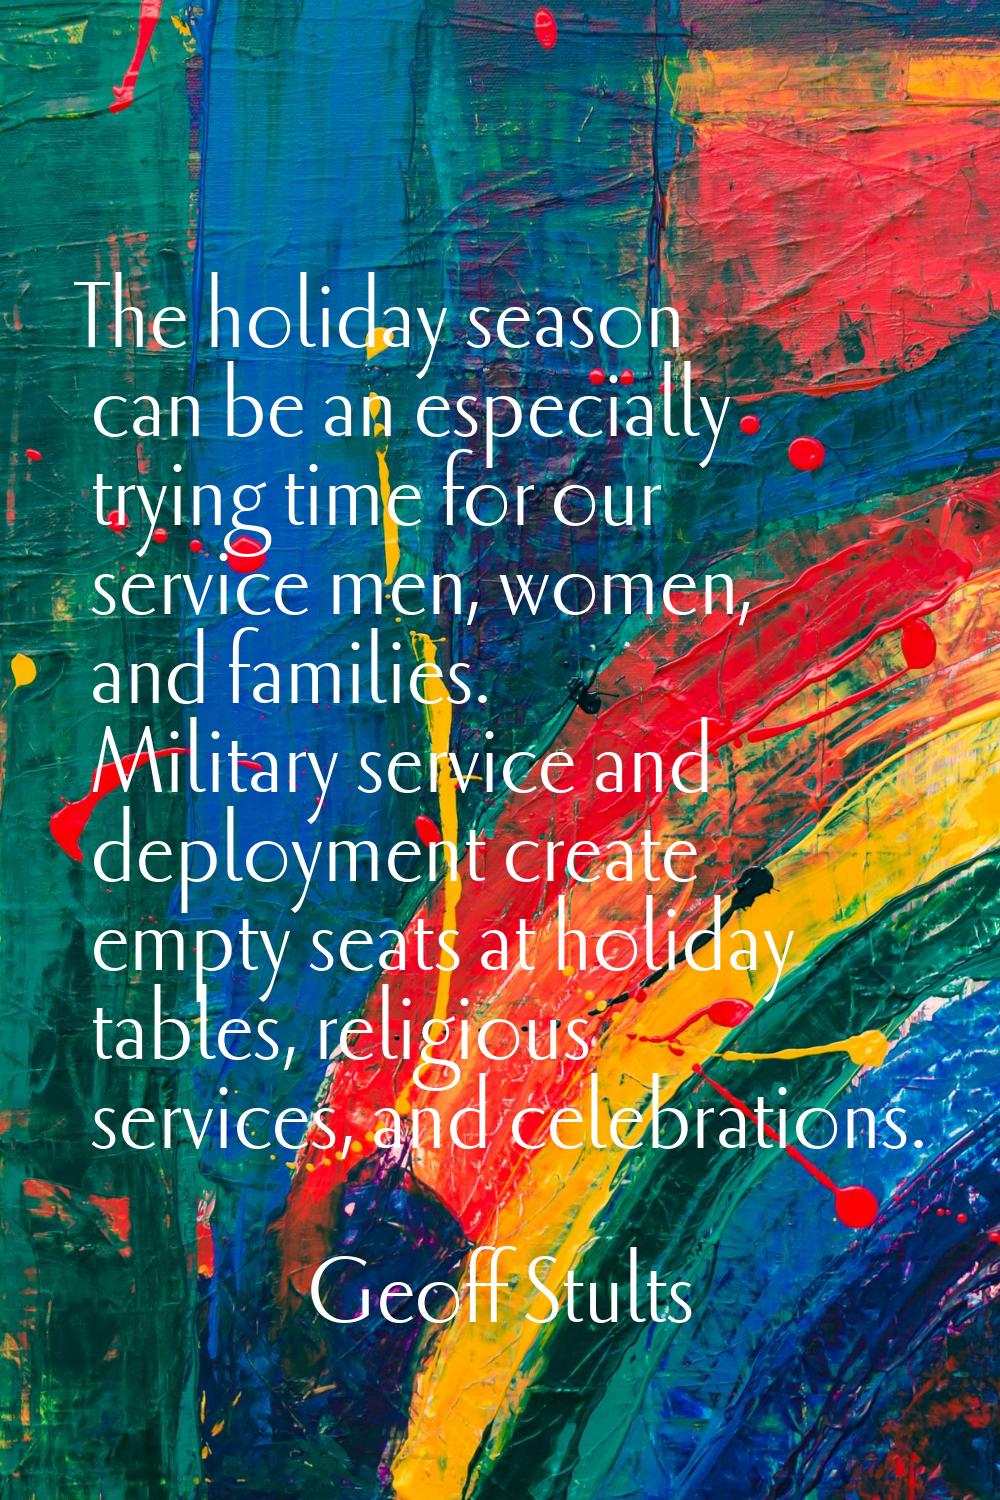 The holiday season can be an especially trying time for our service men, women, and families. Milit